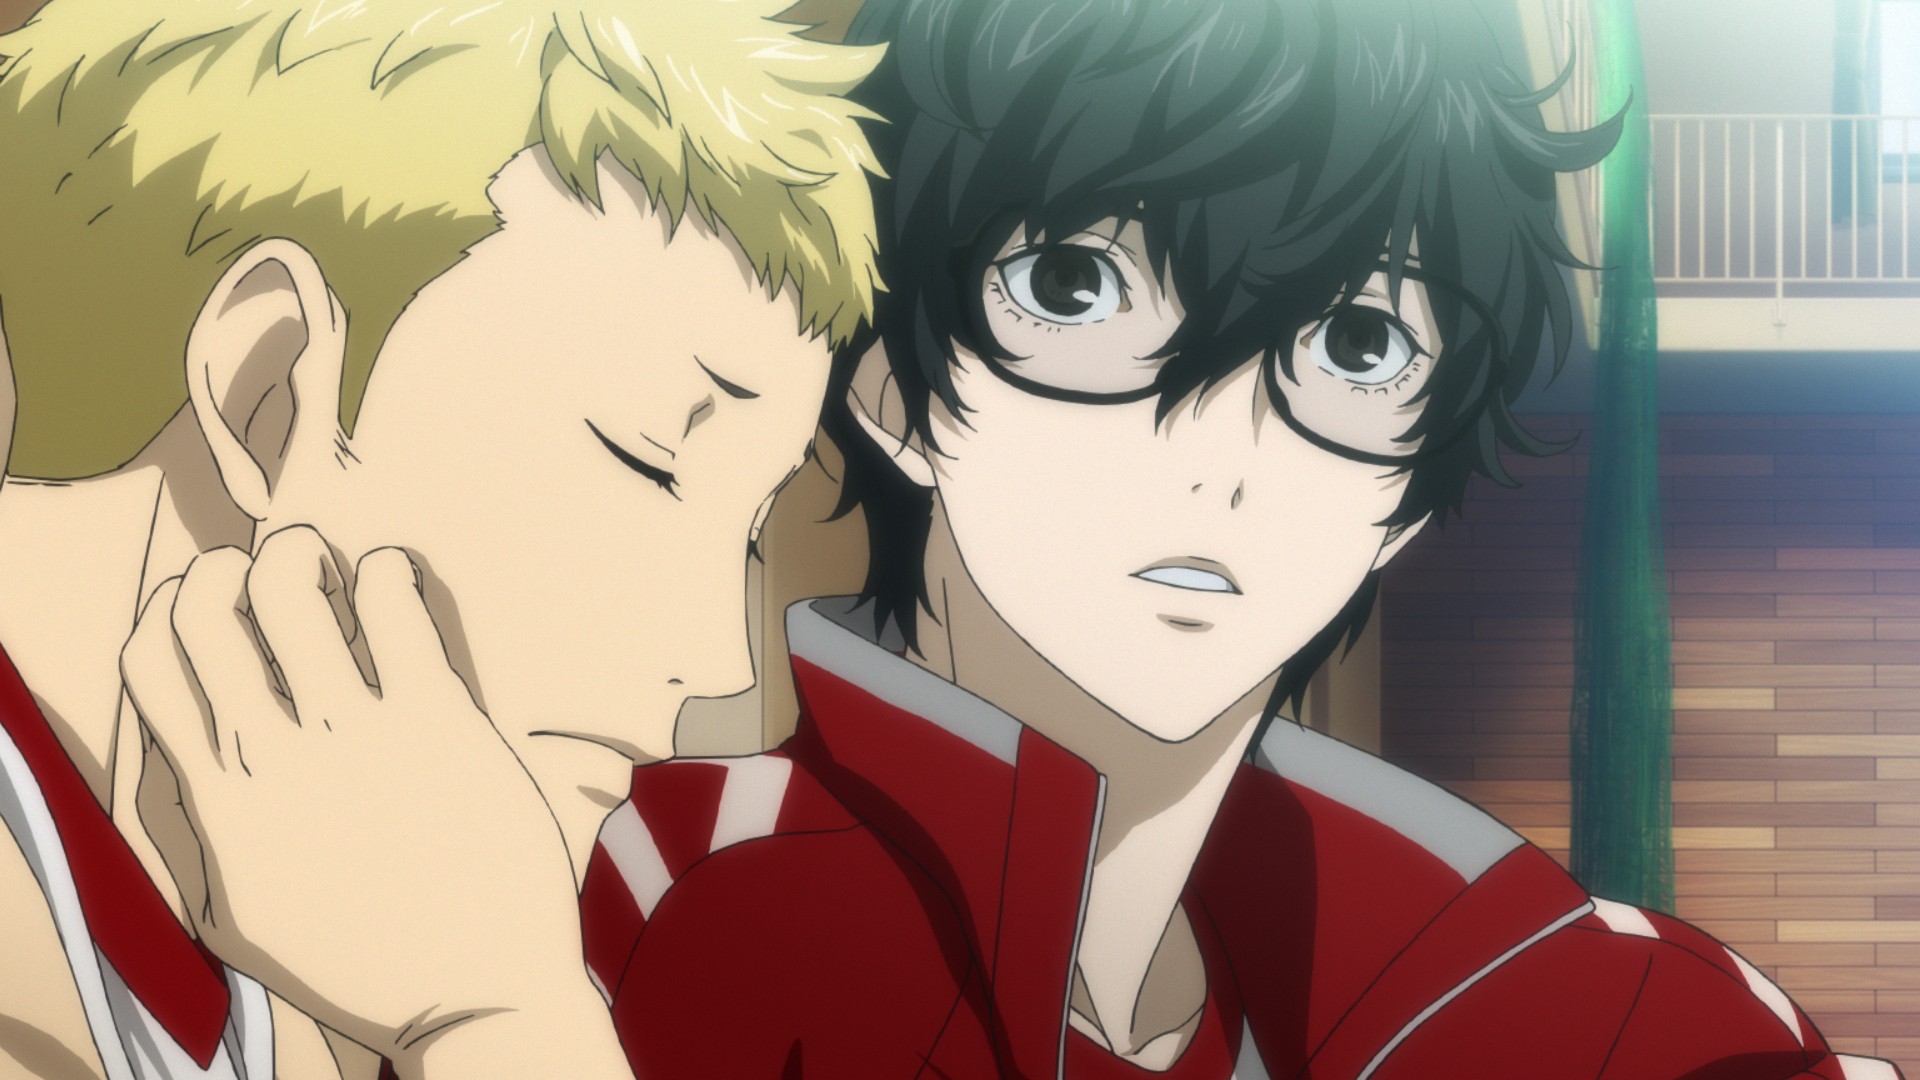 Gorgeous Direct-Feed Screenshots of Persona 5 Will Make You Salivate